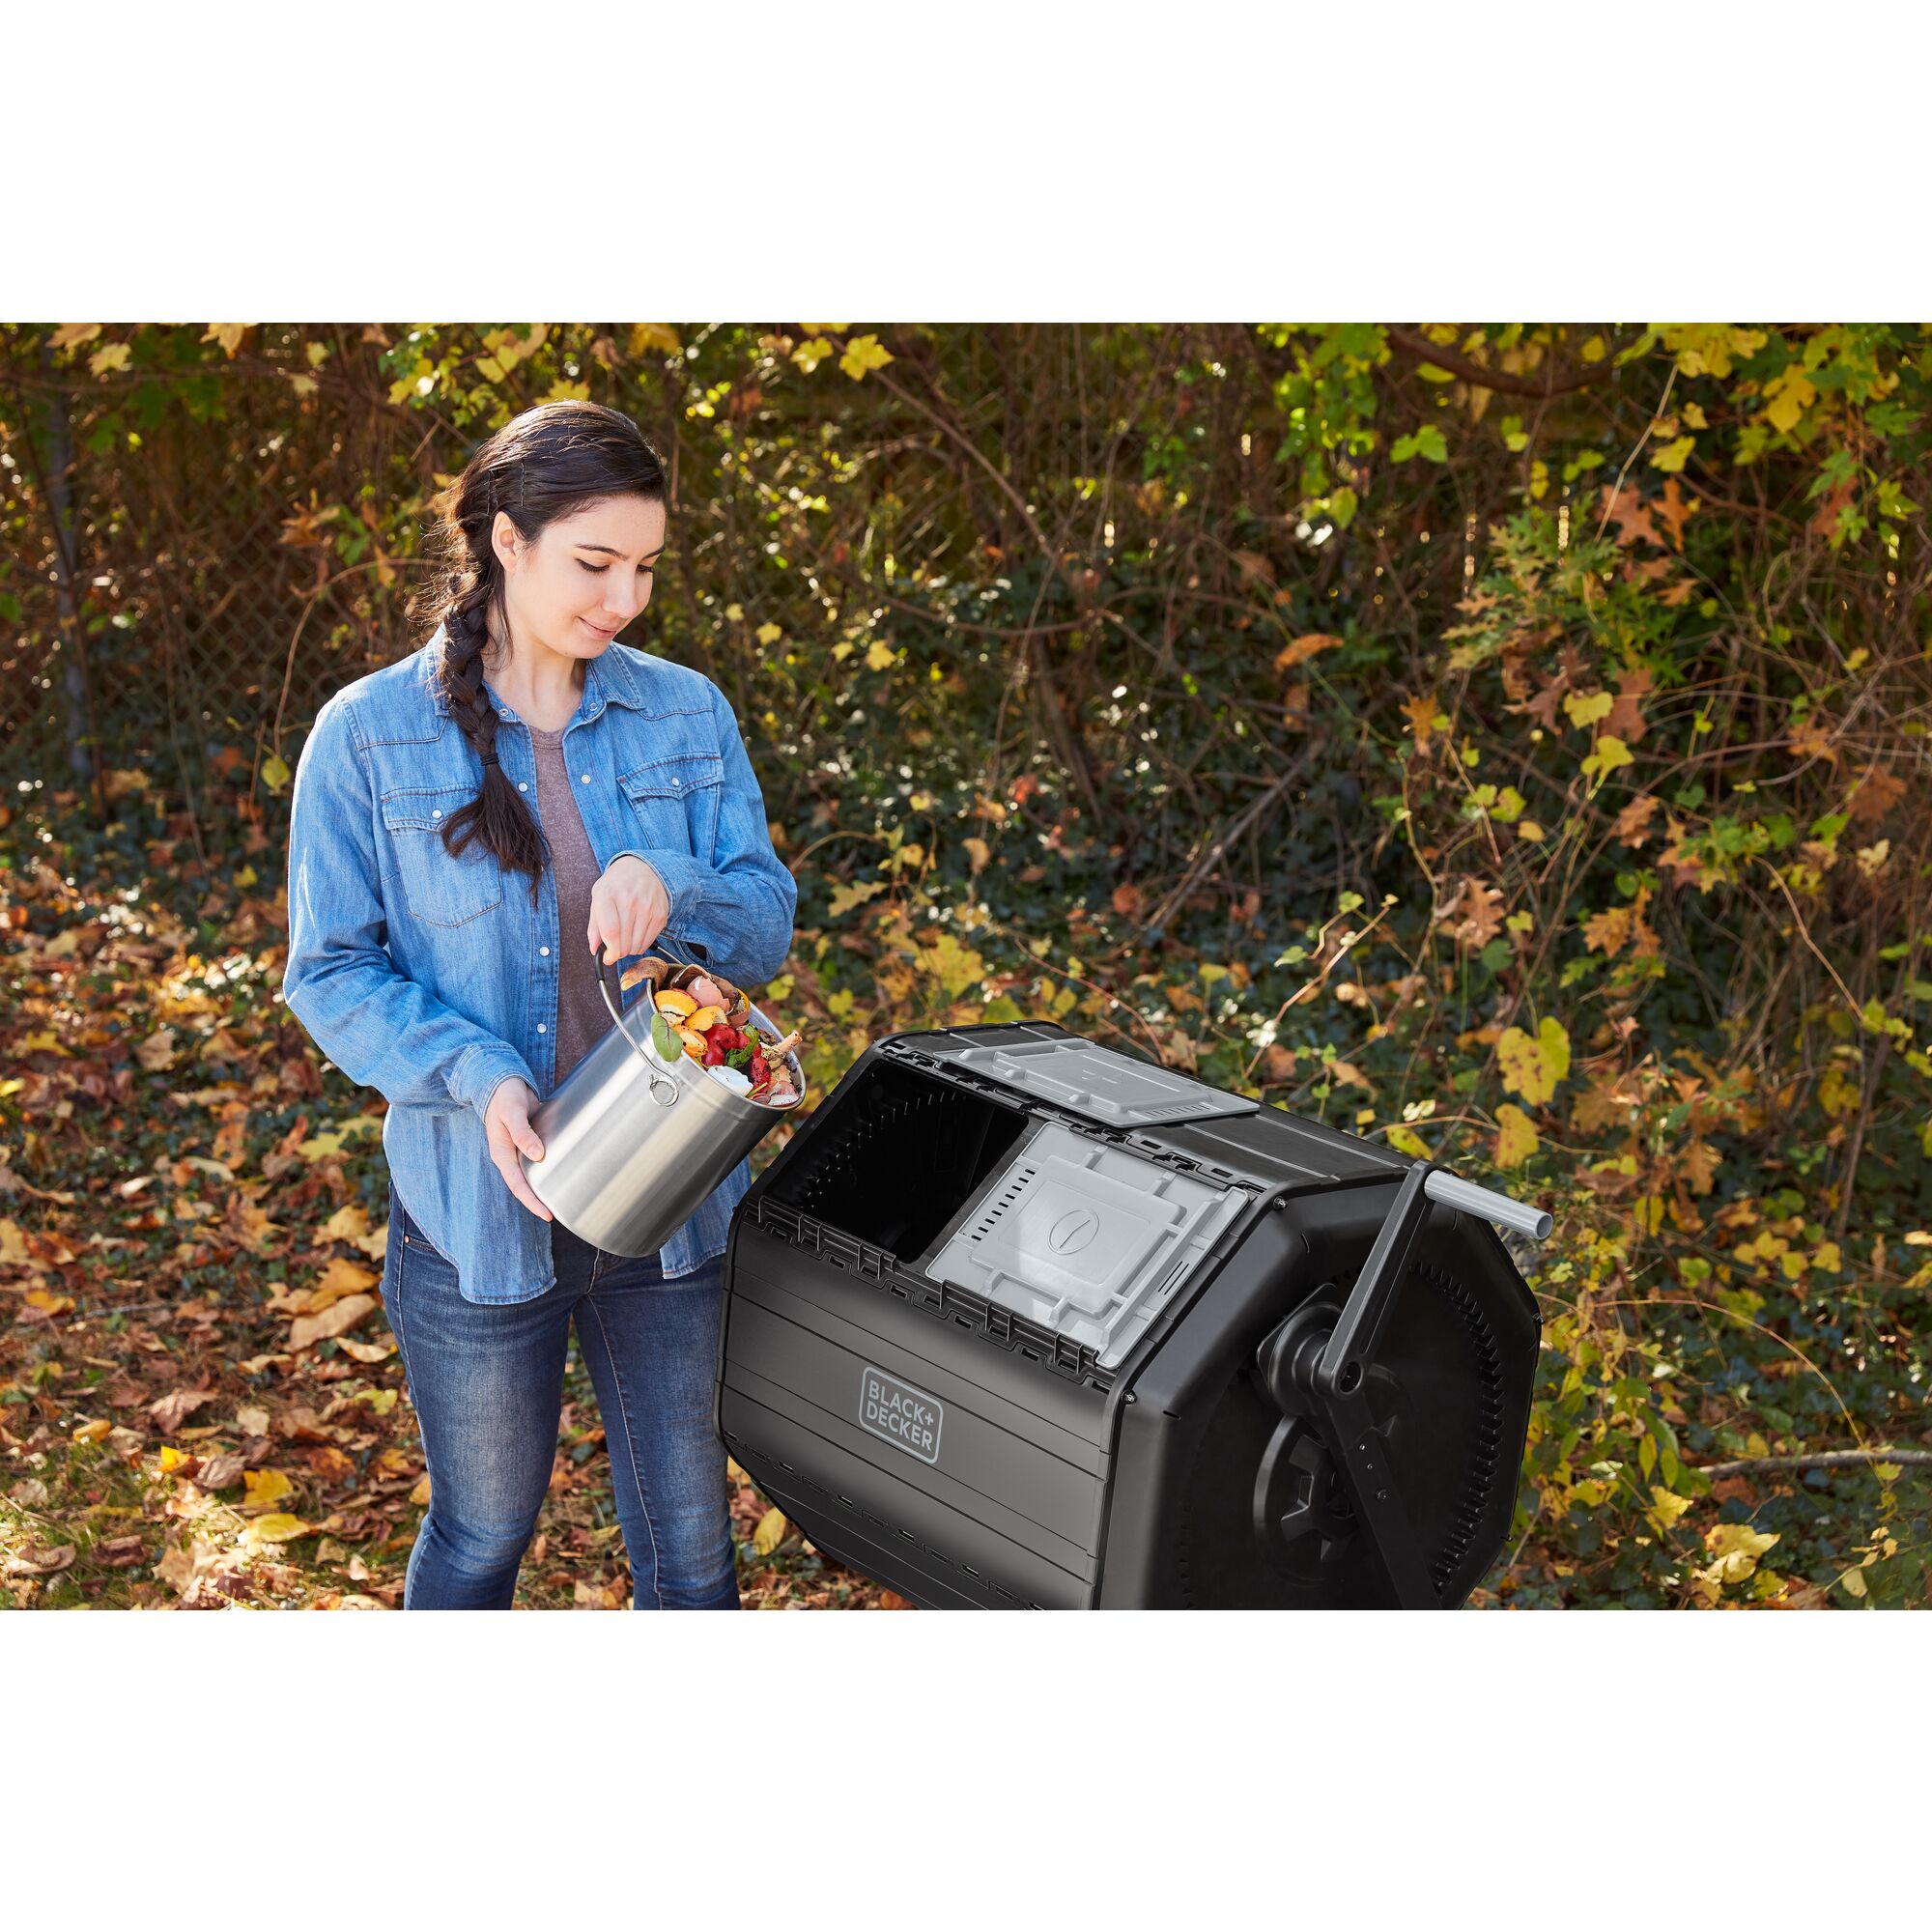 Woman dumping food scraps from the BLACK+DECKER Countertop Compost Bin into the BLACK+DECKER Tumbler Composter